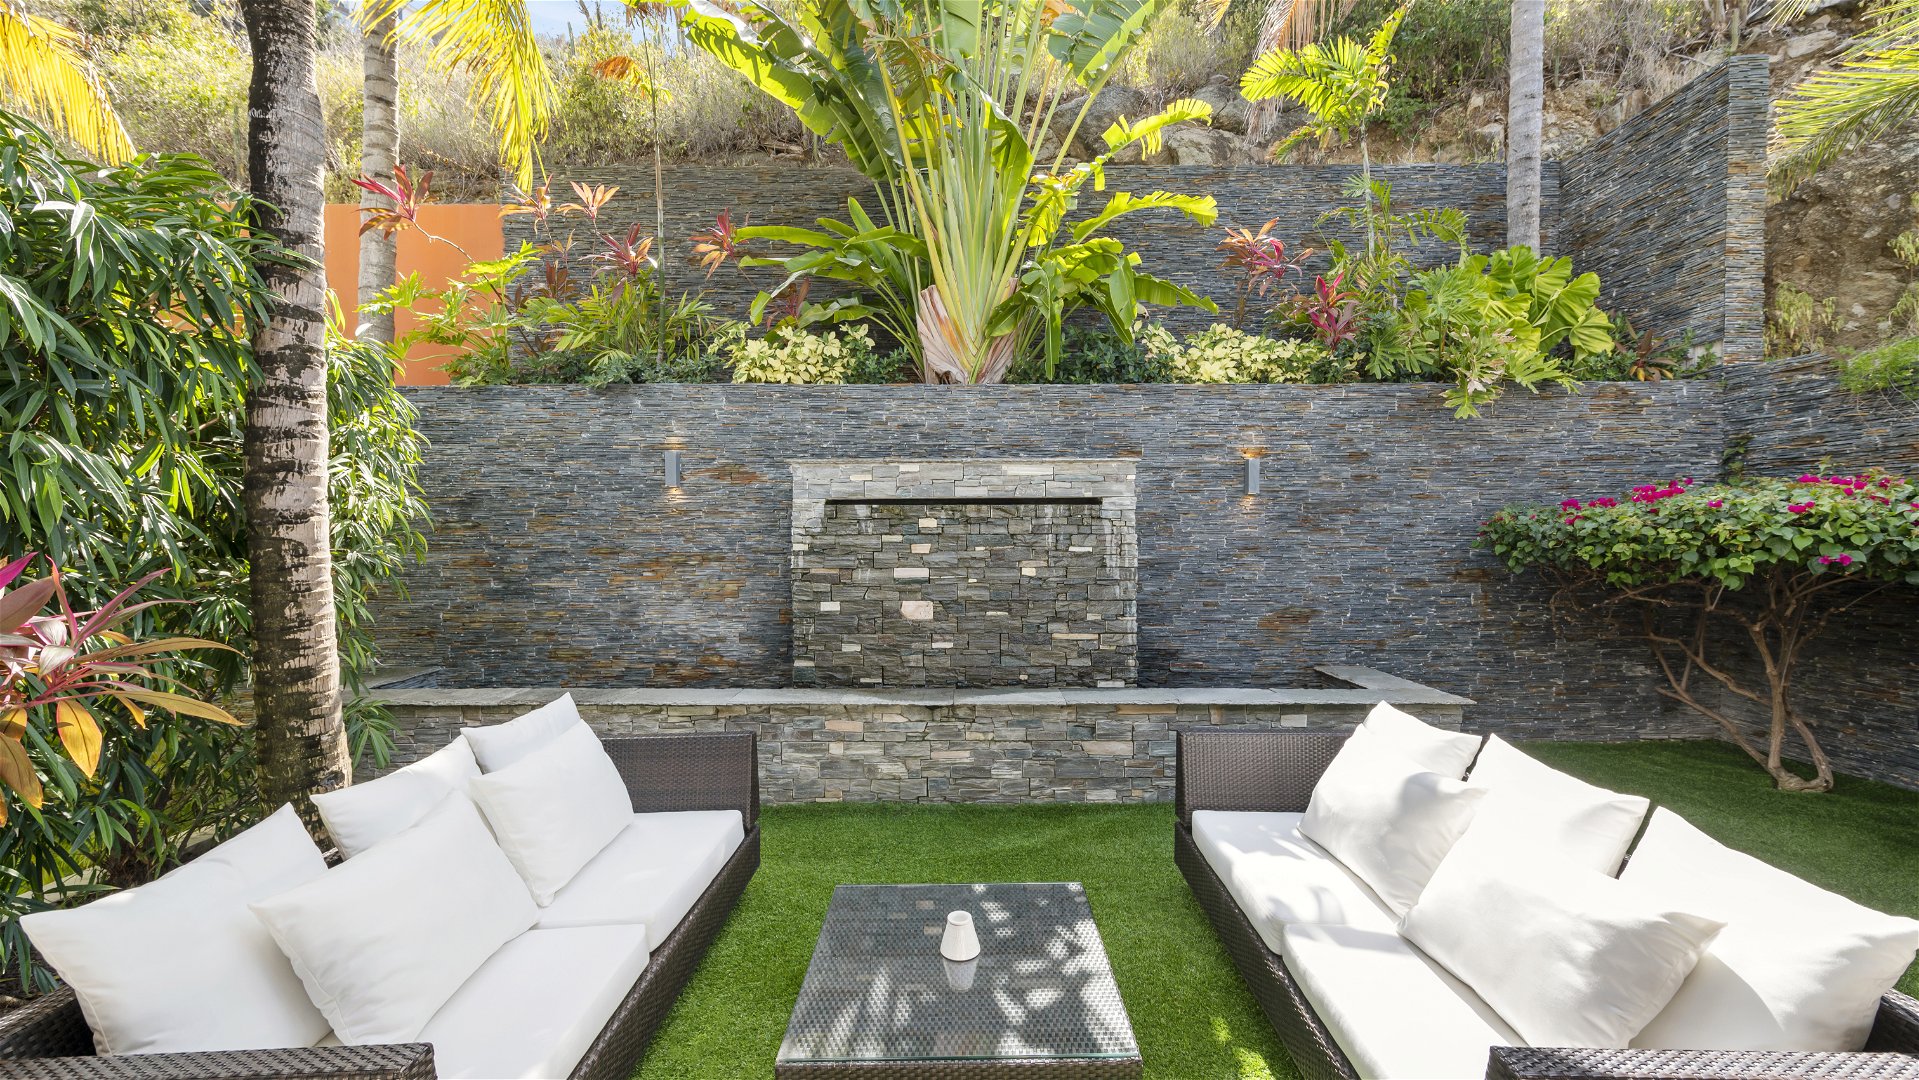 OUTDOOR LOUNGE AREAS